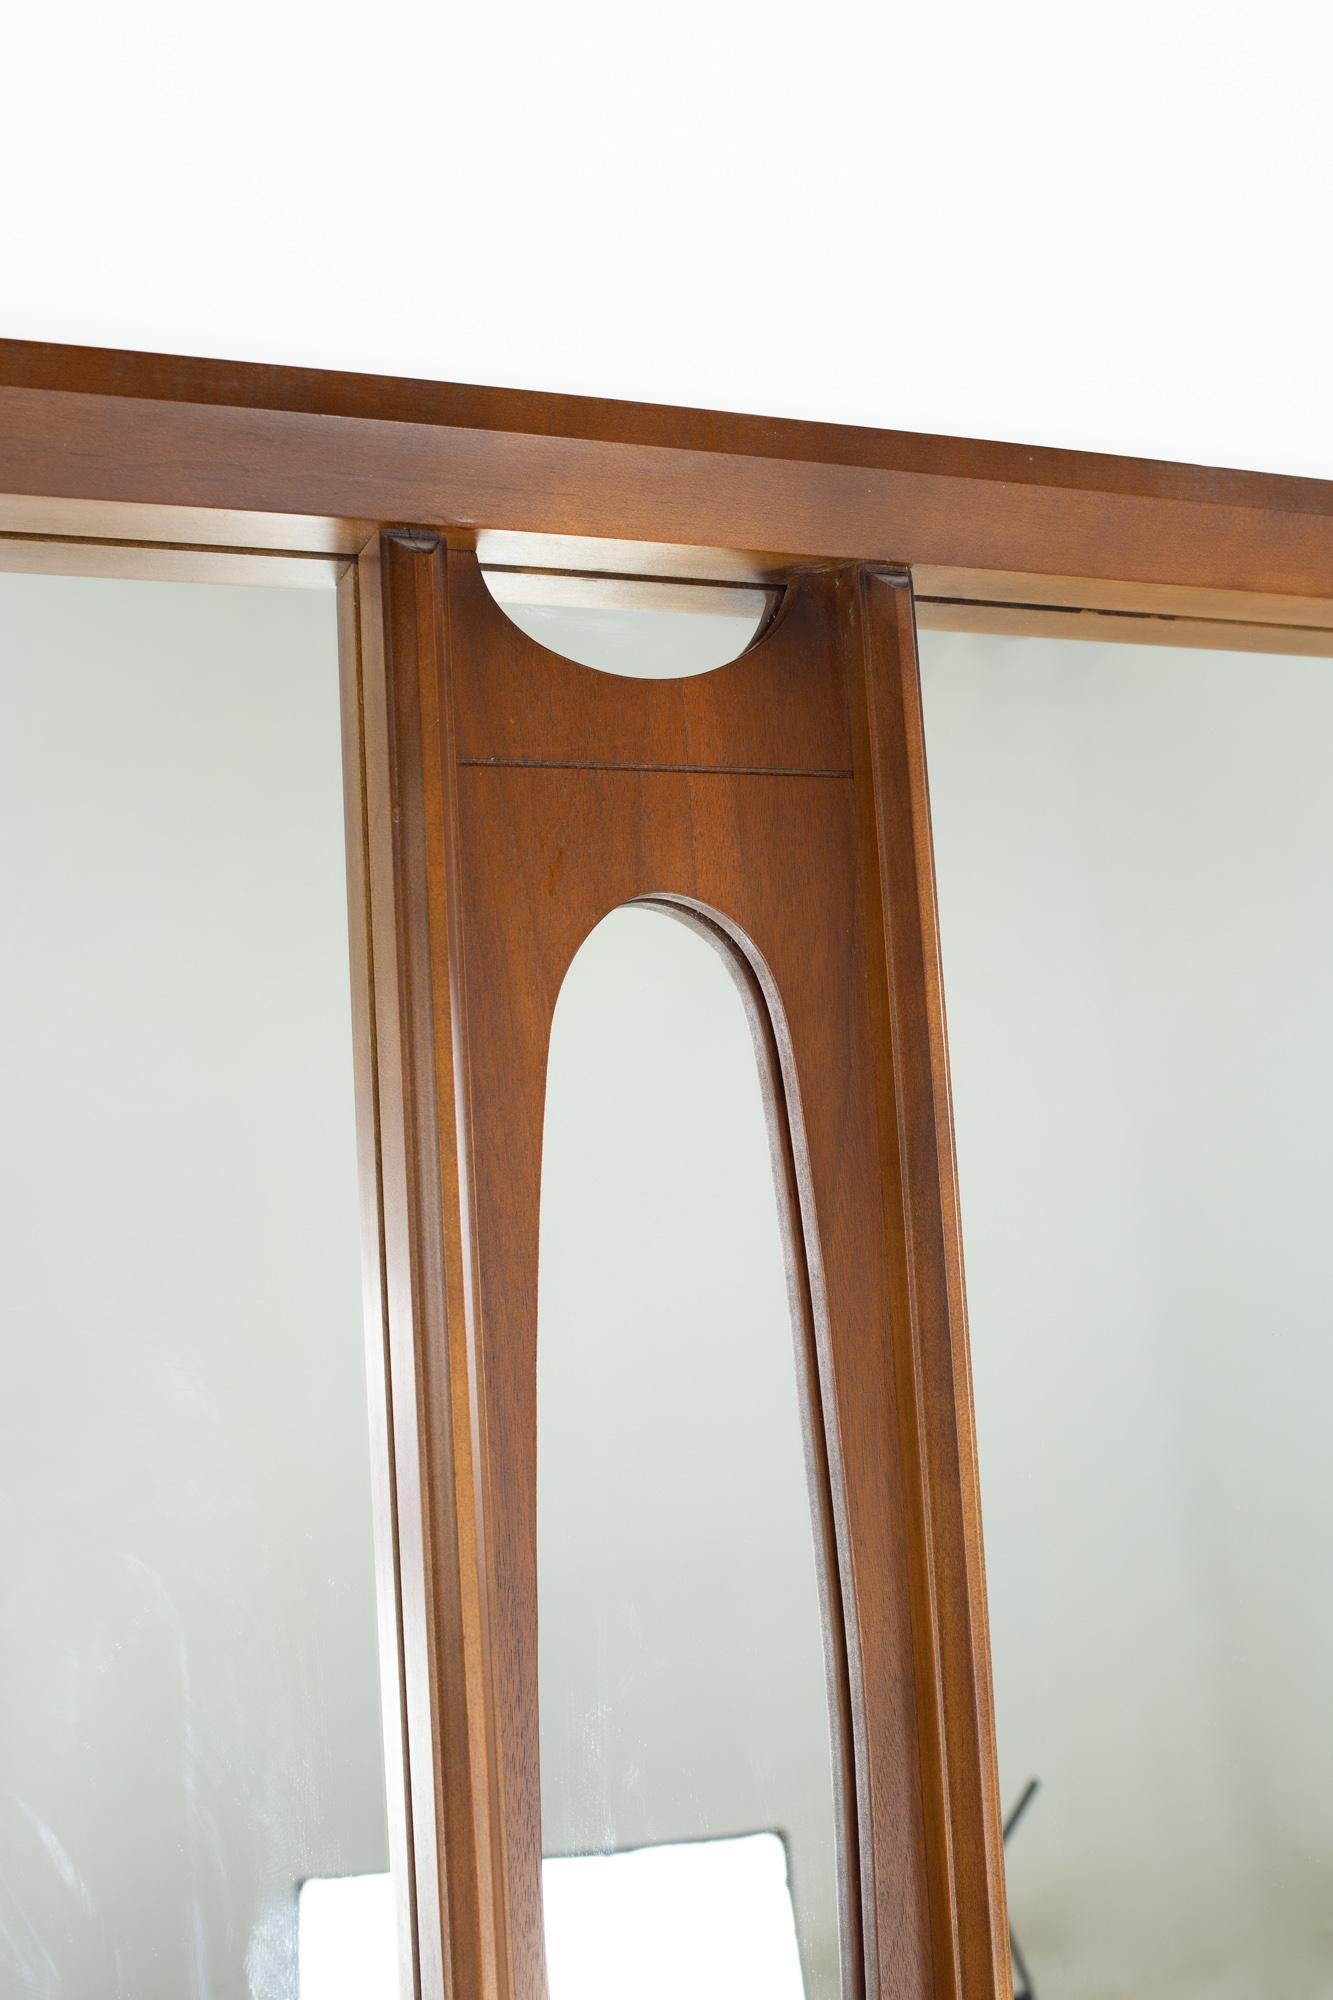 Tobago Brutalist Mid Century walnut mirror

Mirror measures: 62.5 wide x 2.25 deep x 36.5 inches high

All pieces of furniture can be had in what we call restored vintage condition. That means the piece is restored upon purchase so it’s free of